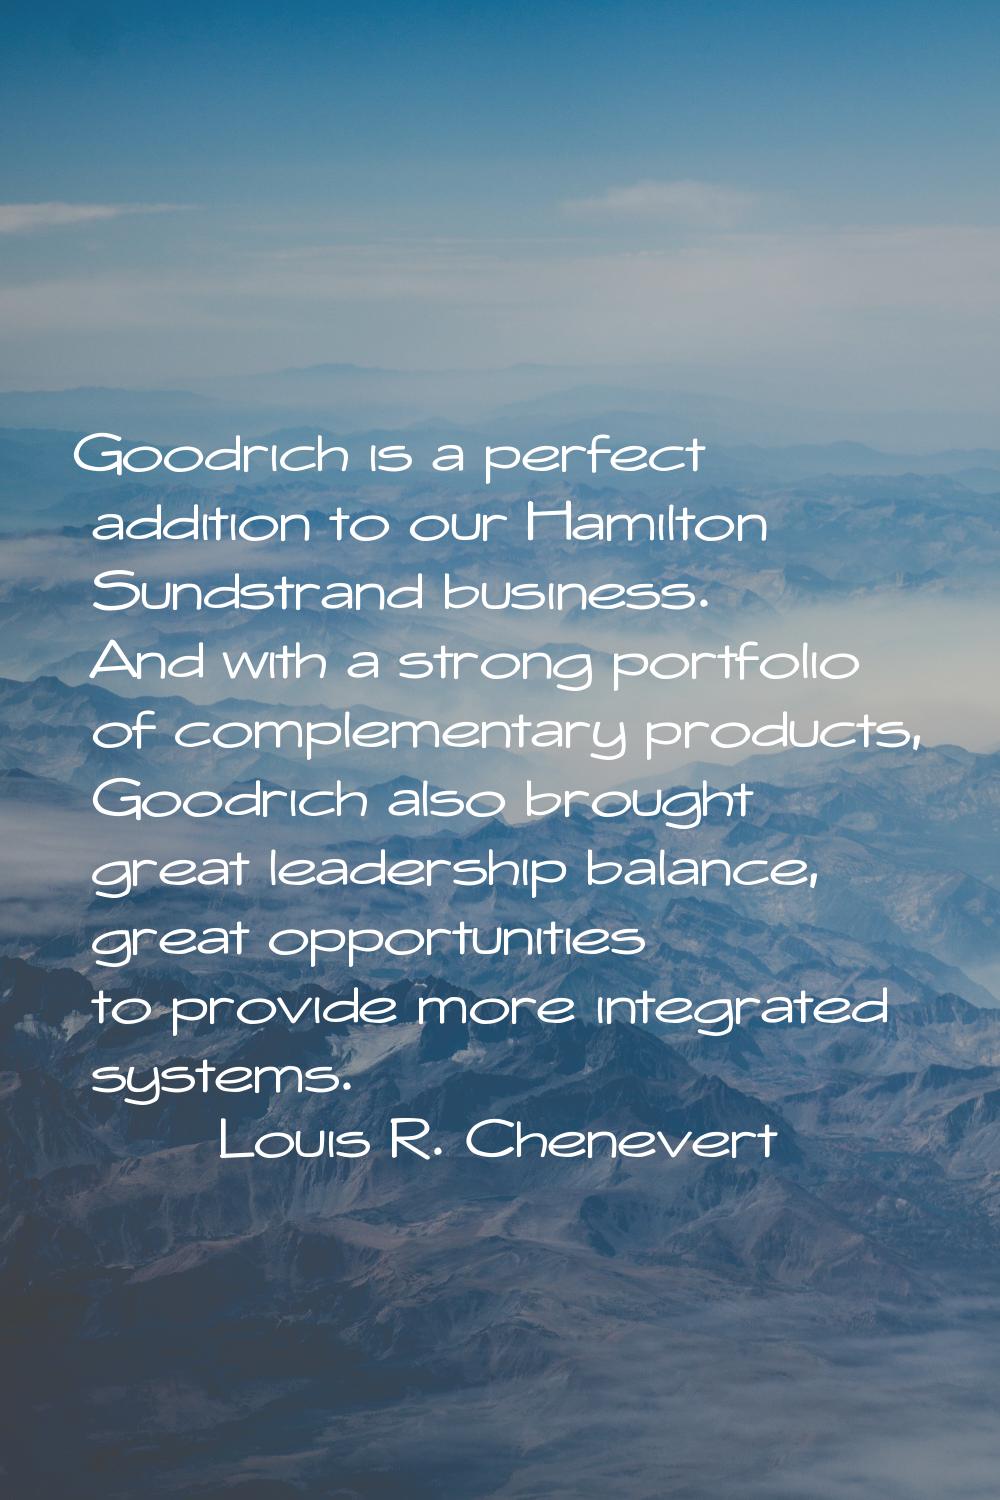 Goodrich is a perfect addition to our Hamilton Sundstrand business. And with a strong portfolio of 